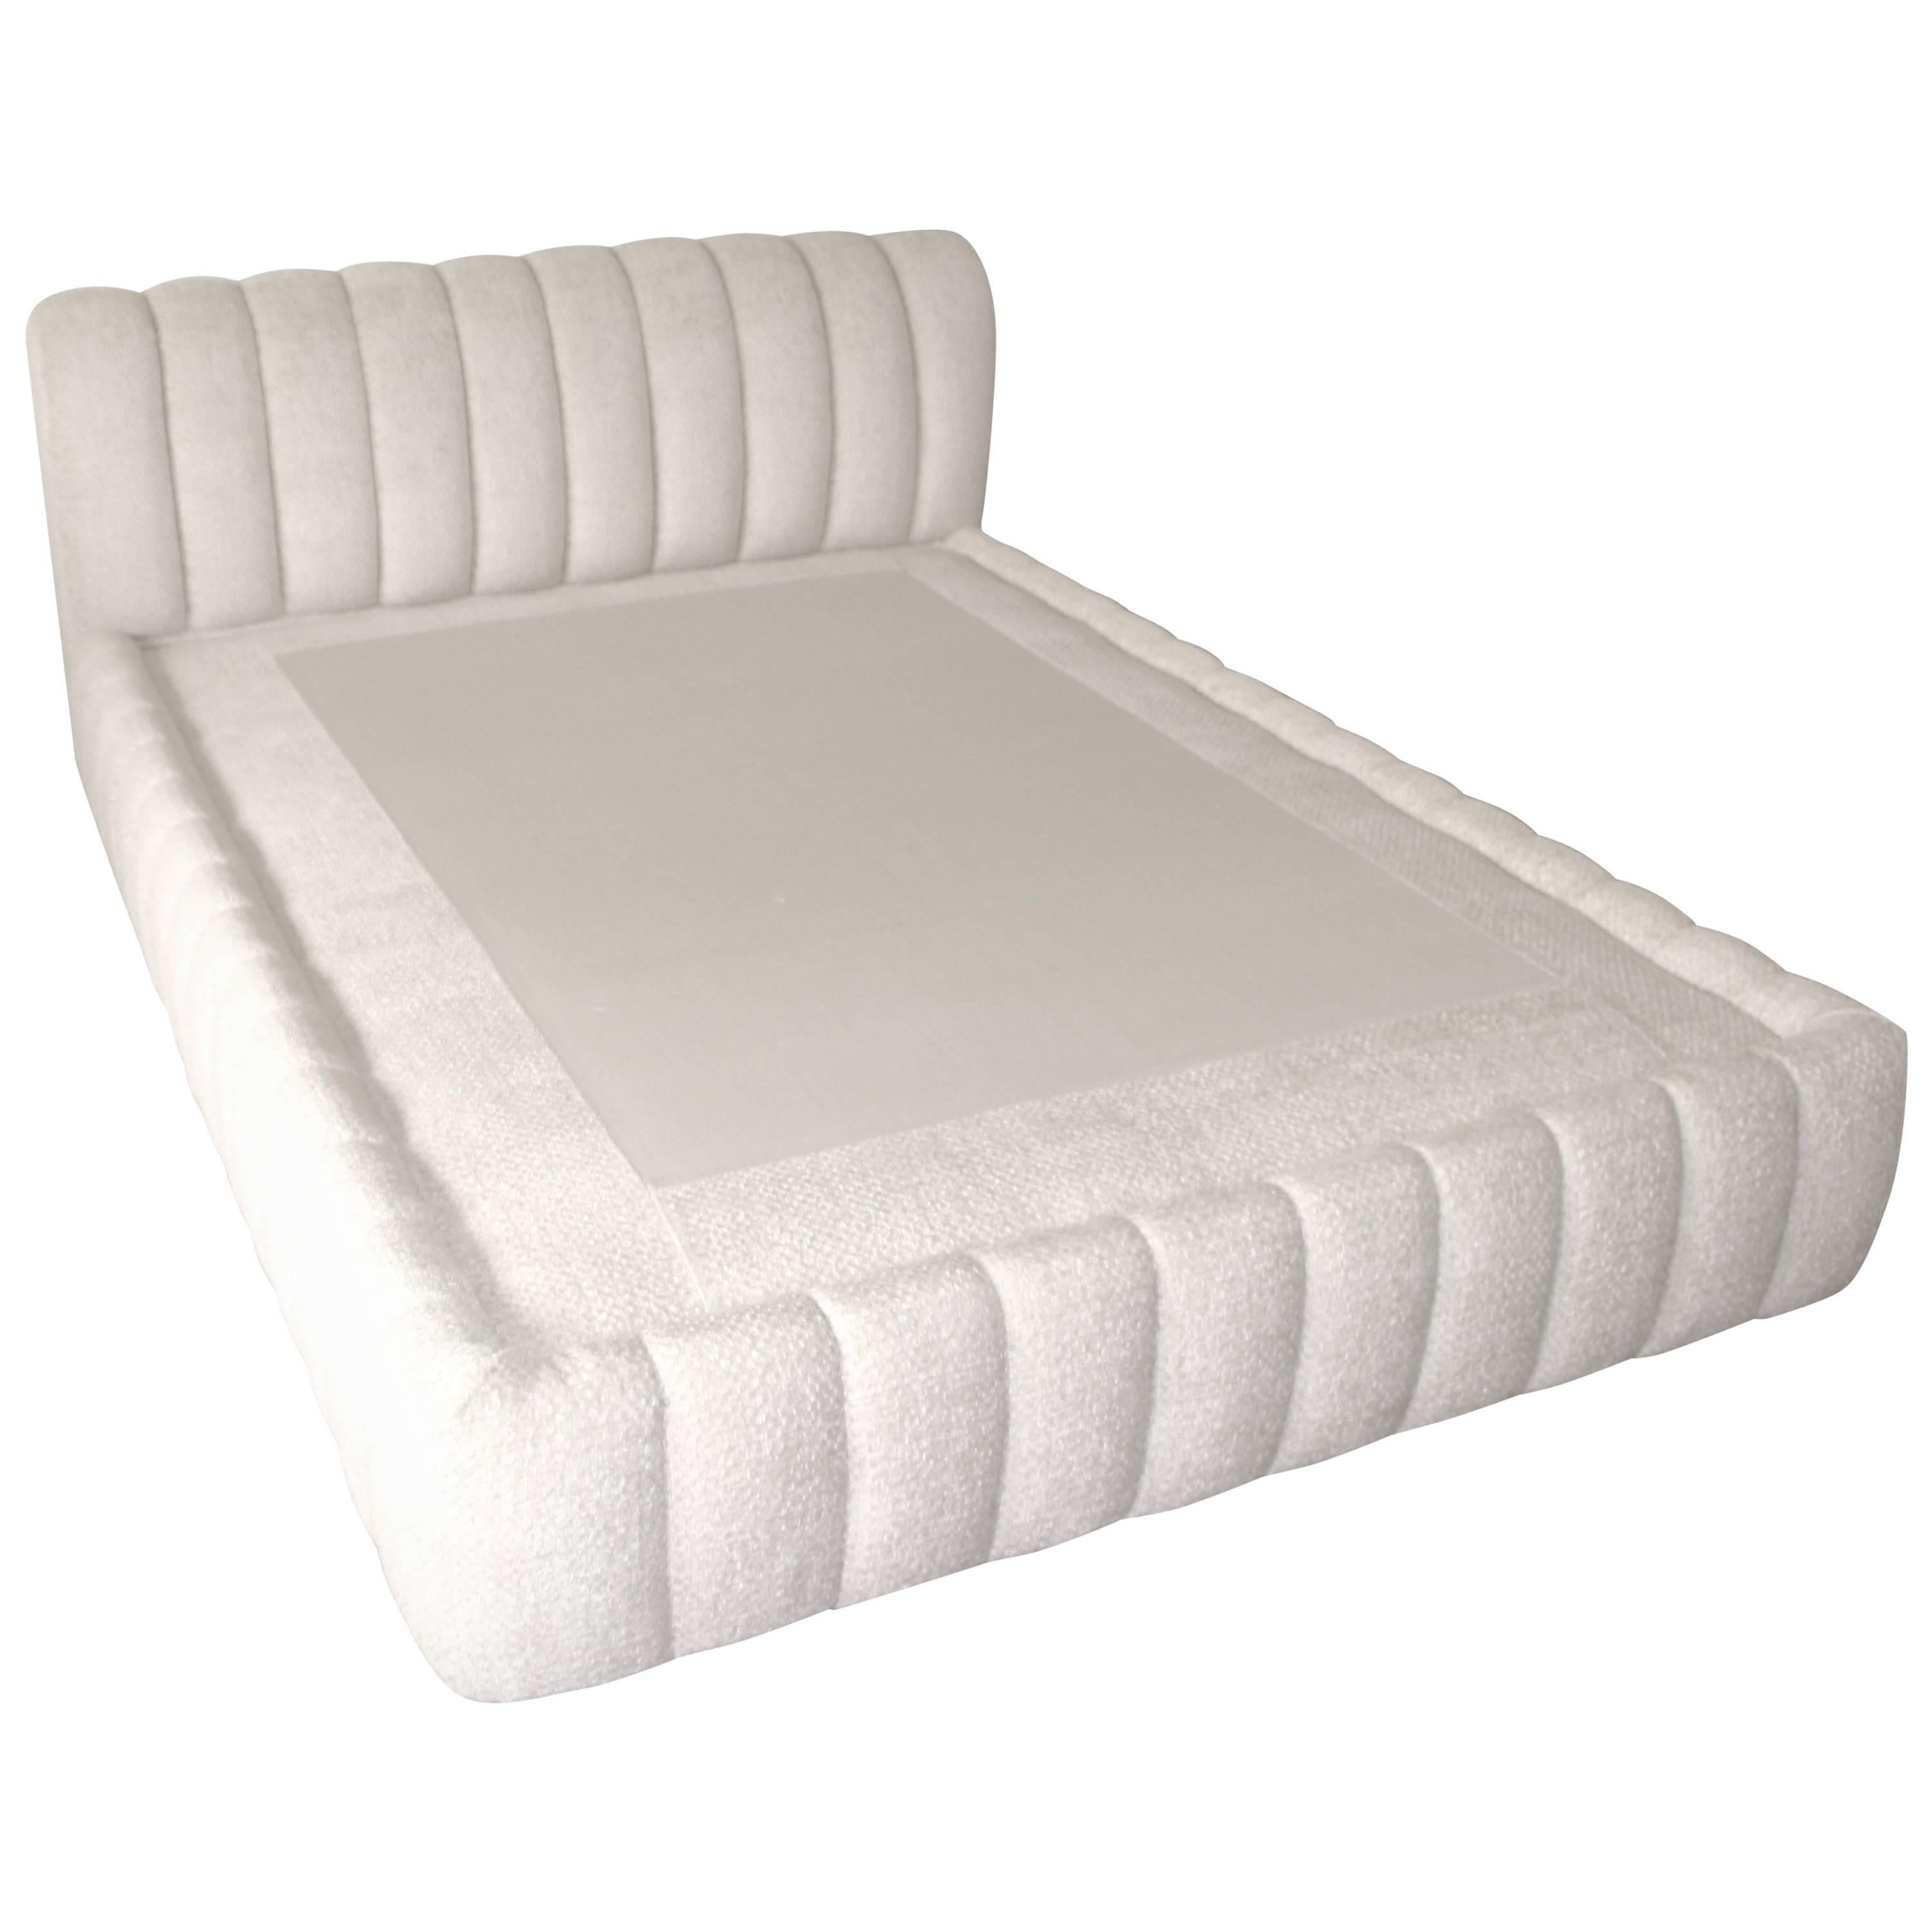 Jay Spectre Tufted Queen-Size Bed in Steve Chase Chunky Chenille Fabric